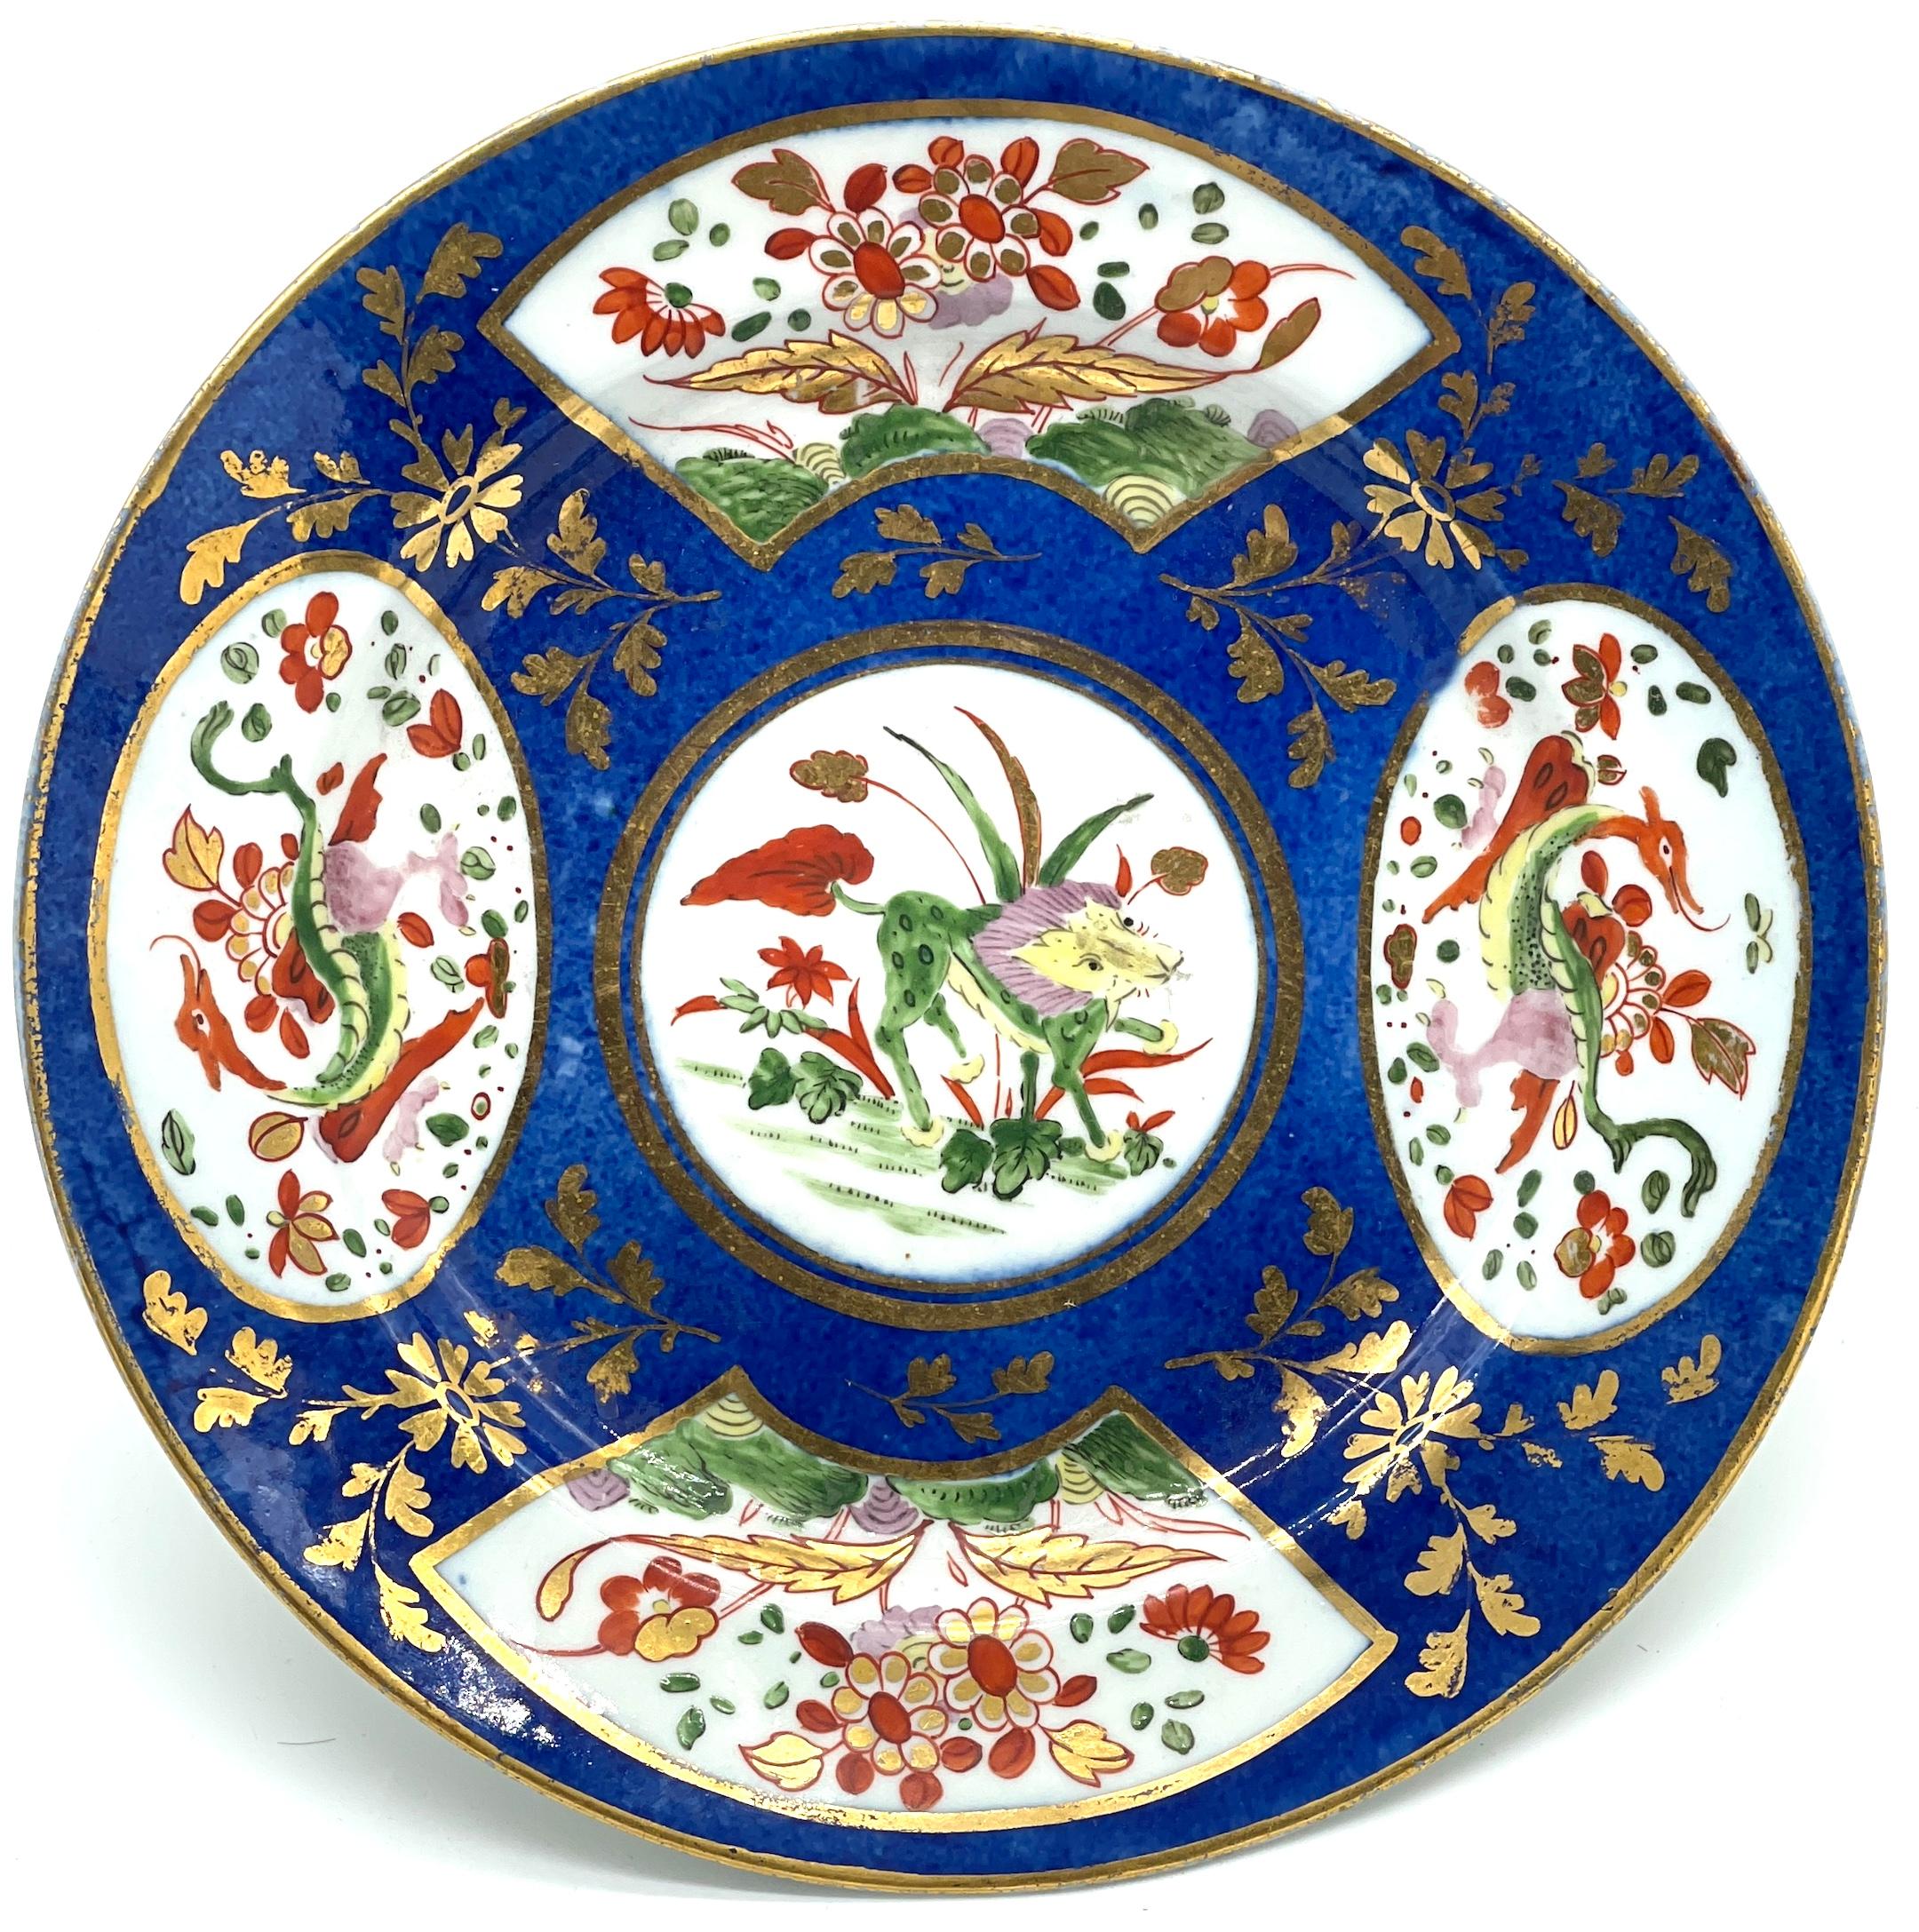 Chamberlains Worcester 'Africa' Pattern Cobalt Blue Plate 
England, circa 1820s

An exquisite Chamberlain's Worcester 'Africa' Pattern Cobalt Blue Plate originating from England, circa the 1820s. This plate boasts a circular form with an 8.75-inch